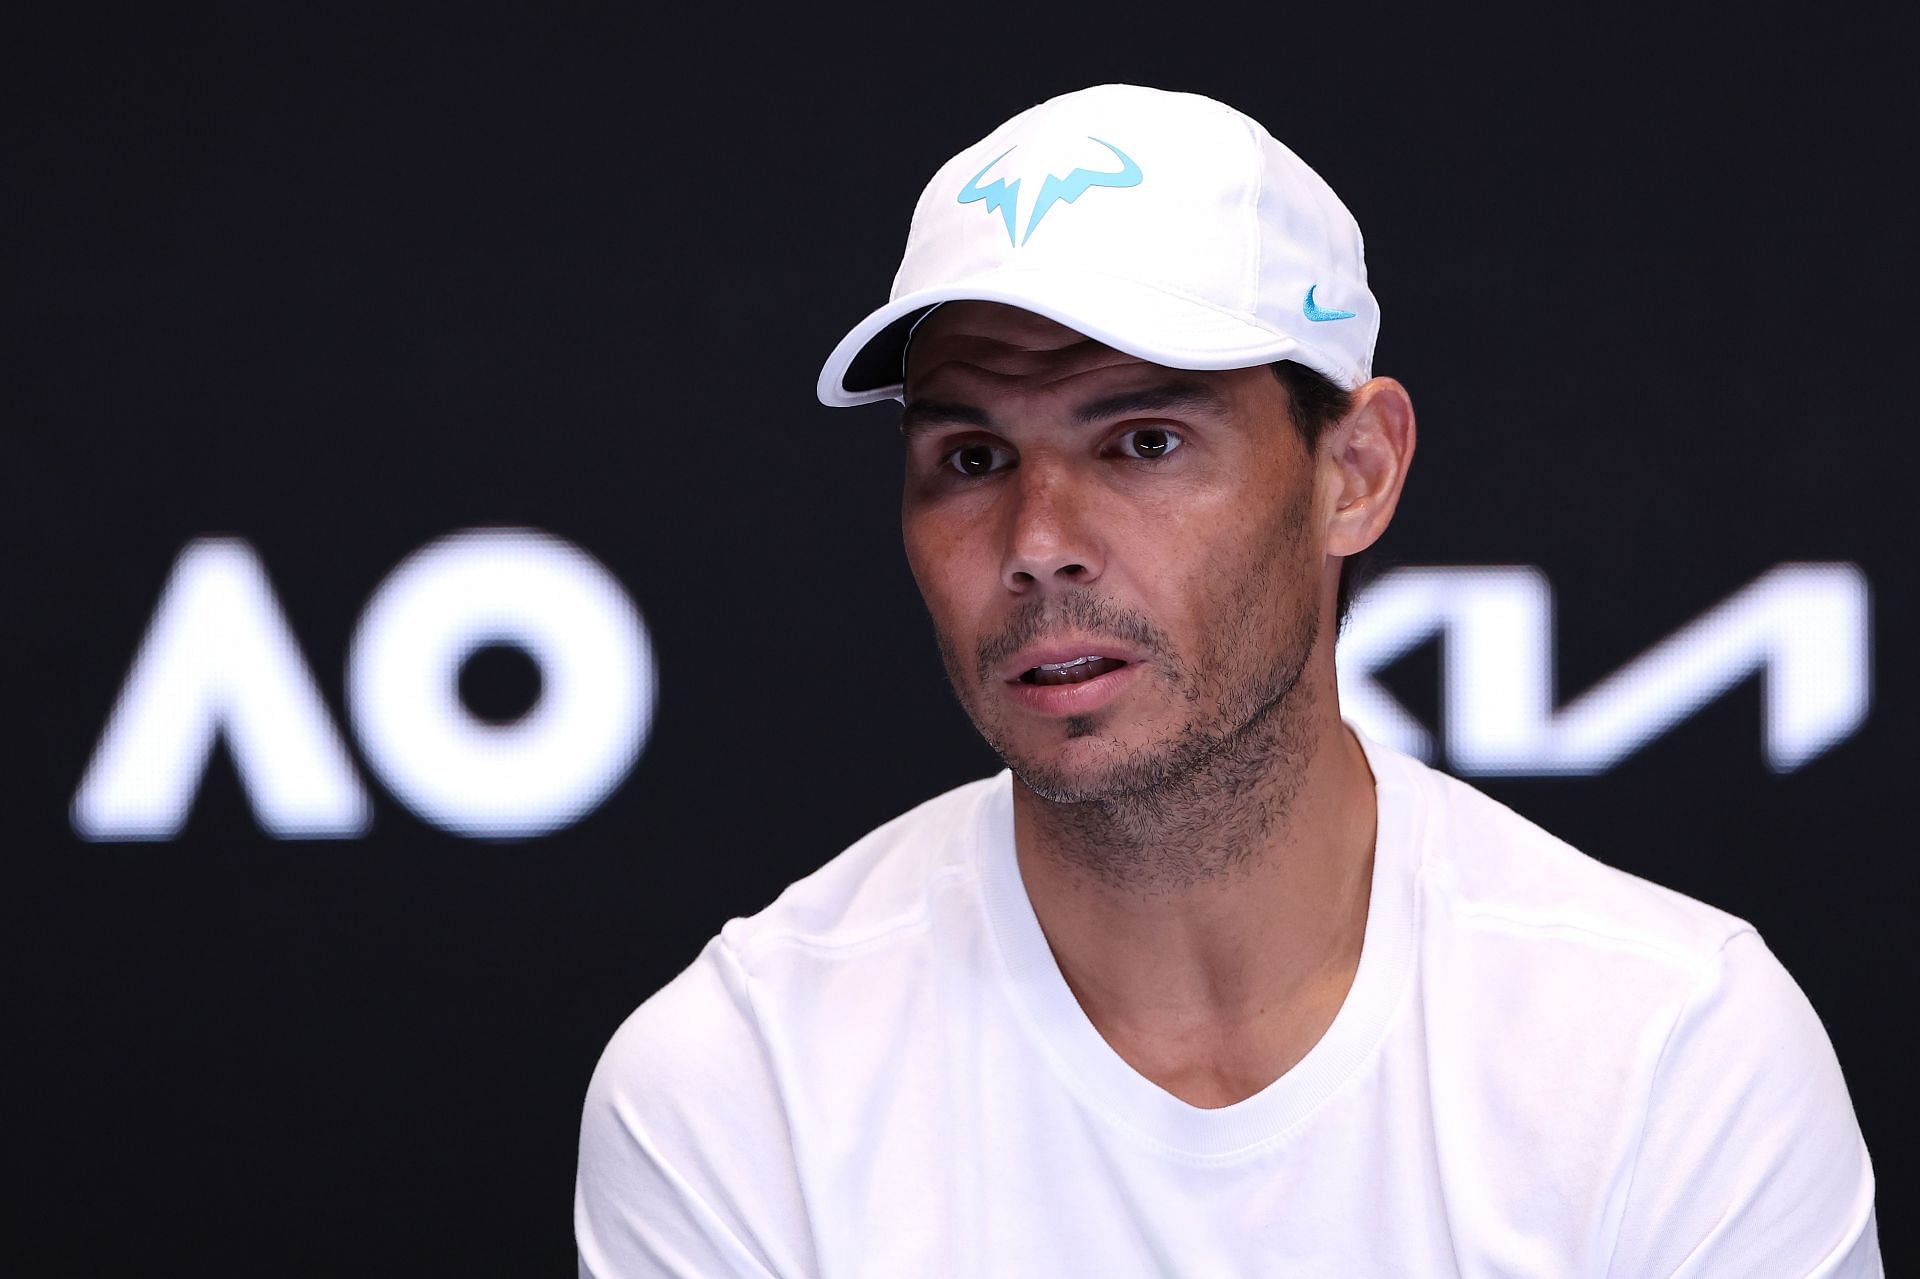 Rafael Nadal after his second-round exit at Australian Open 2023